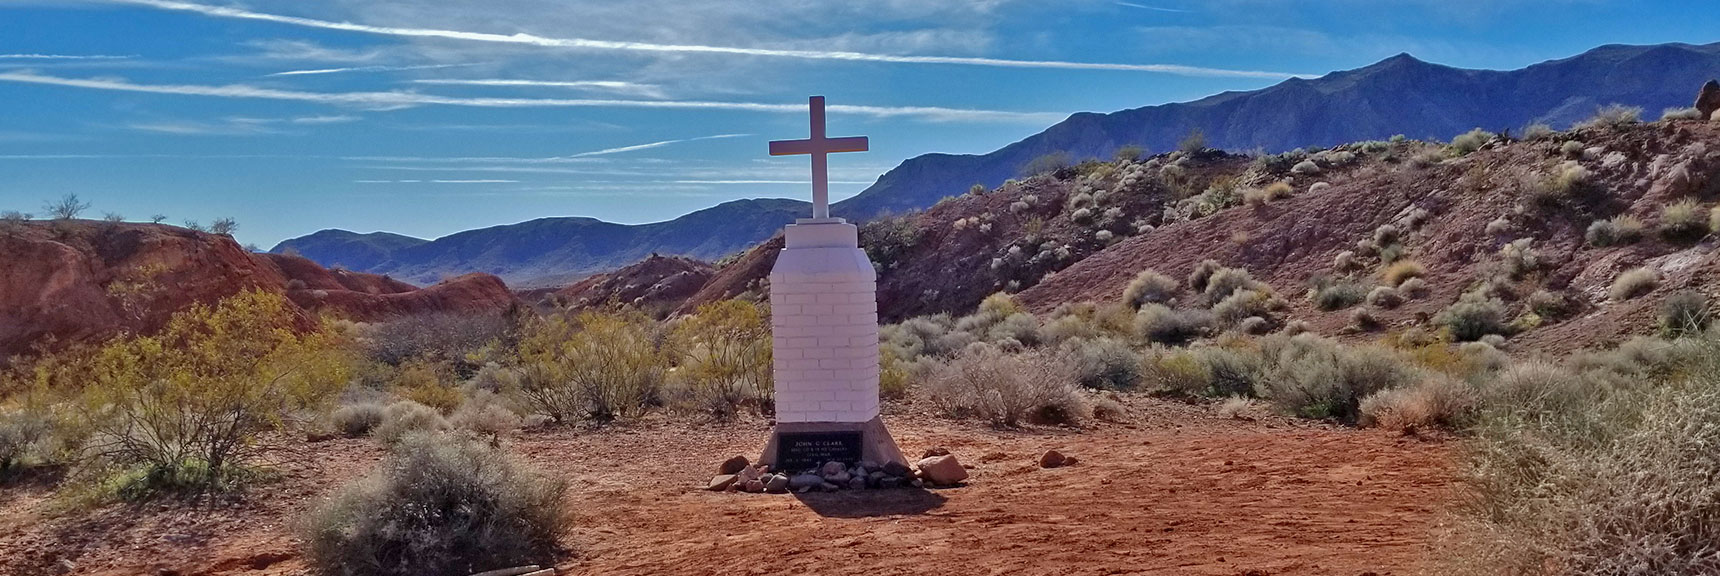 Memorial for John G. Clark at the Beginning of Charlie's Spring Trail, Valley of Fire State Park, Nevada